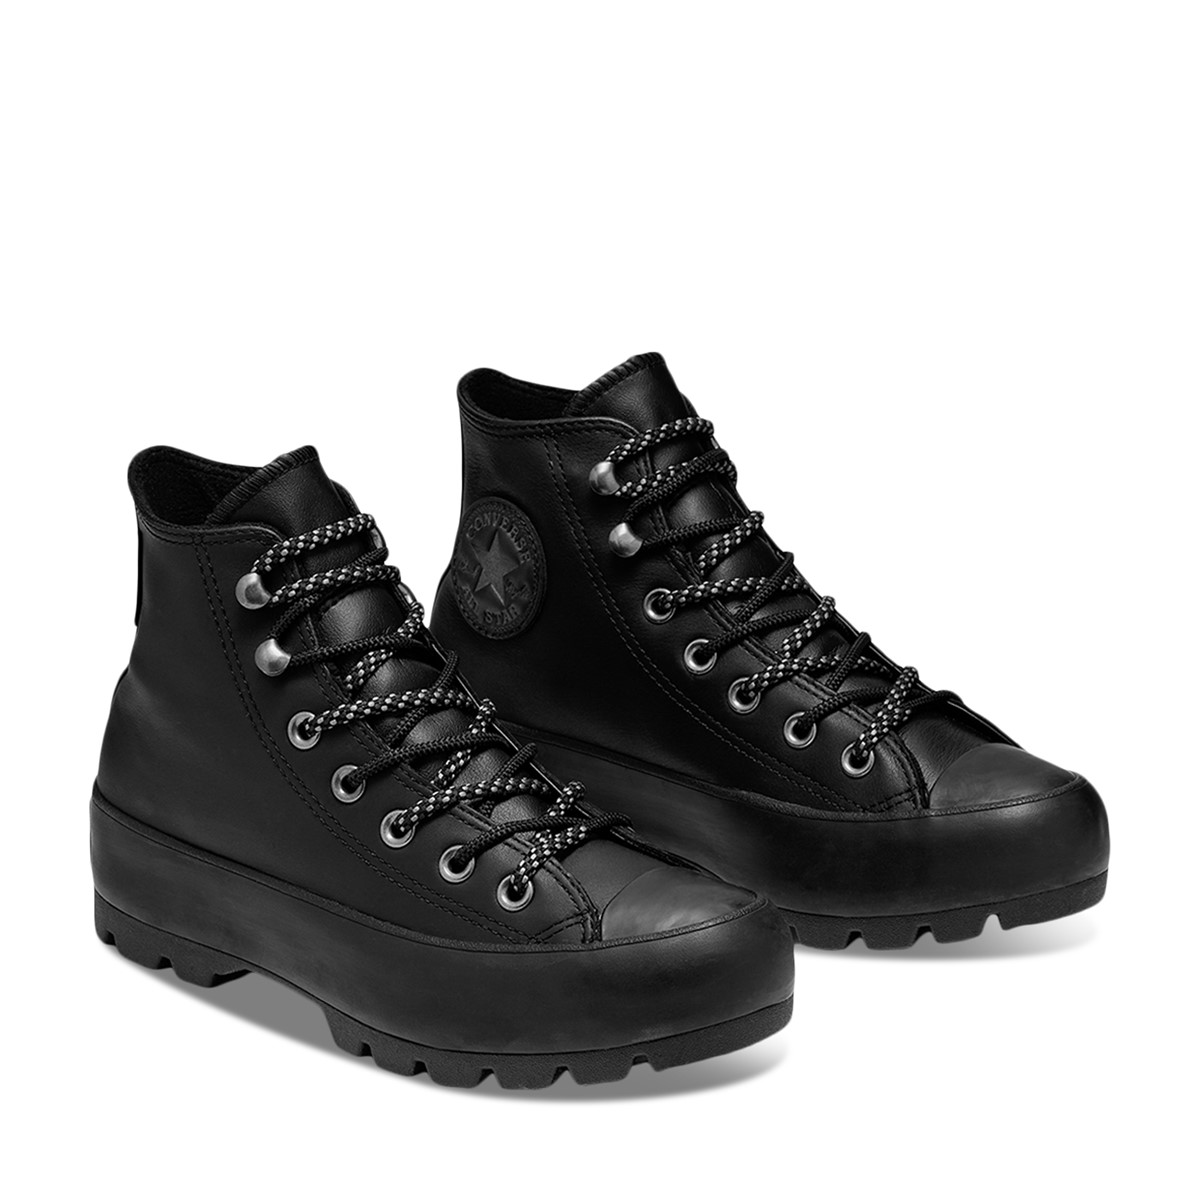 GORE-TEX Lugged Sneaker Boots 